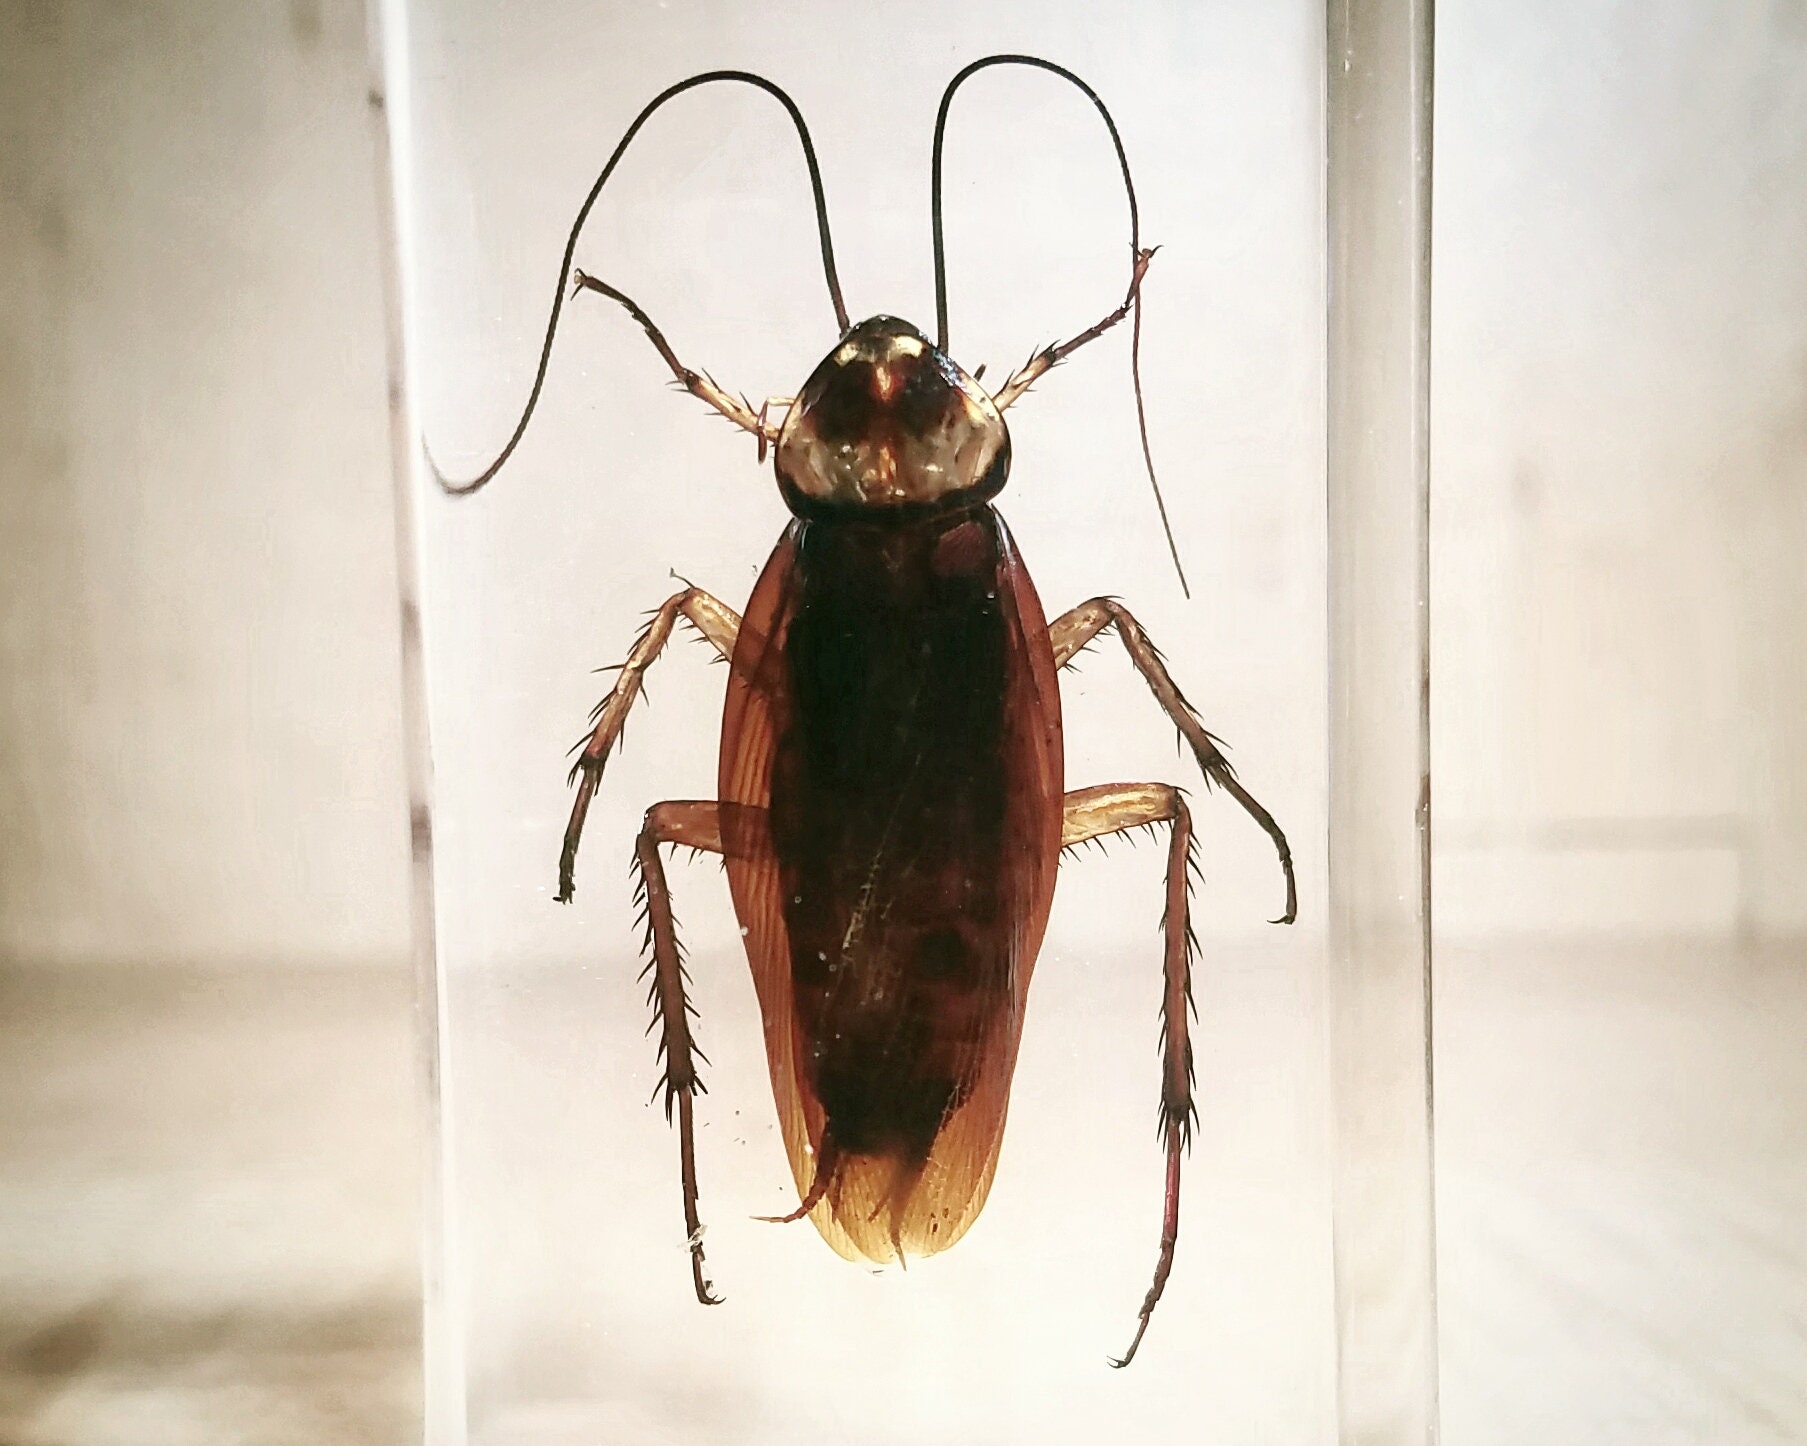 Real Cockroach in Resin, Insects in Resin, 0ddities Curiosities, Roach 